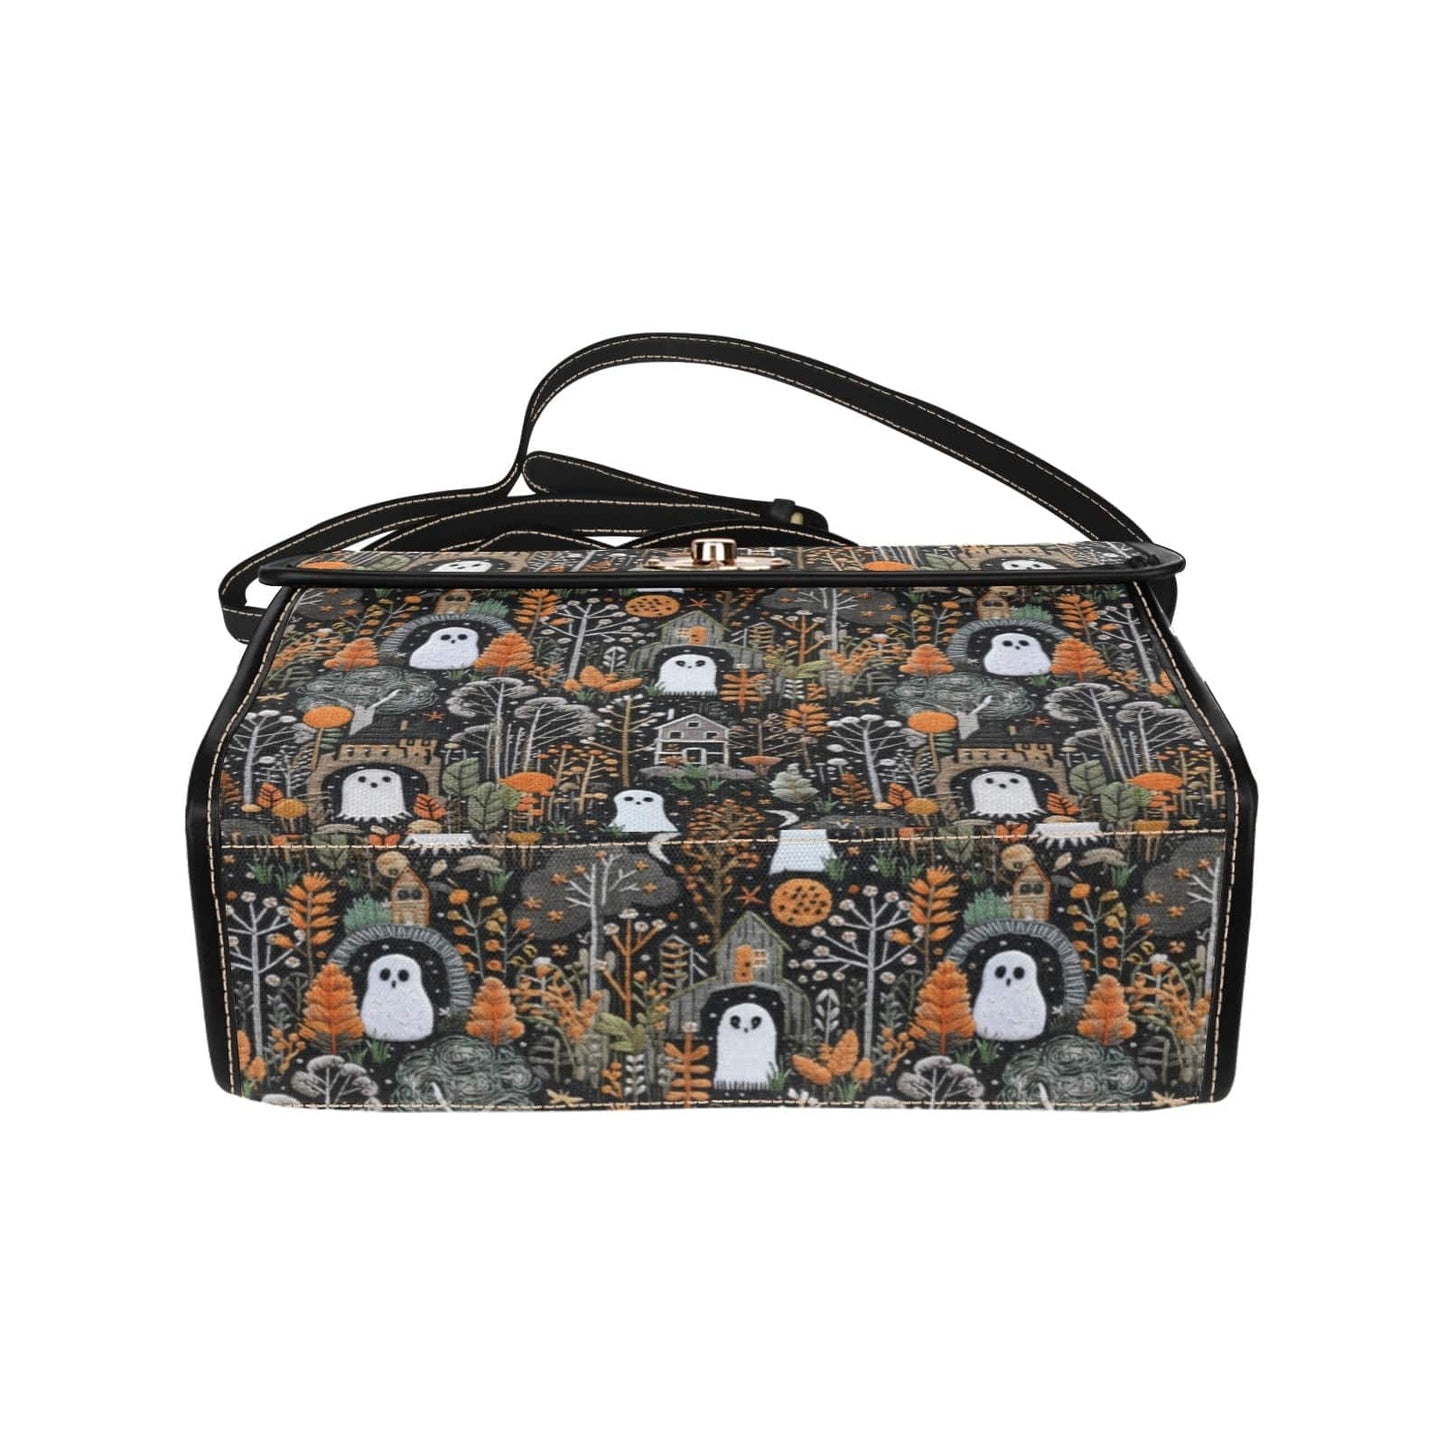 Ghostly House Satchel Bag with Black Trim